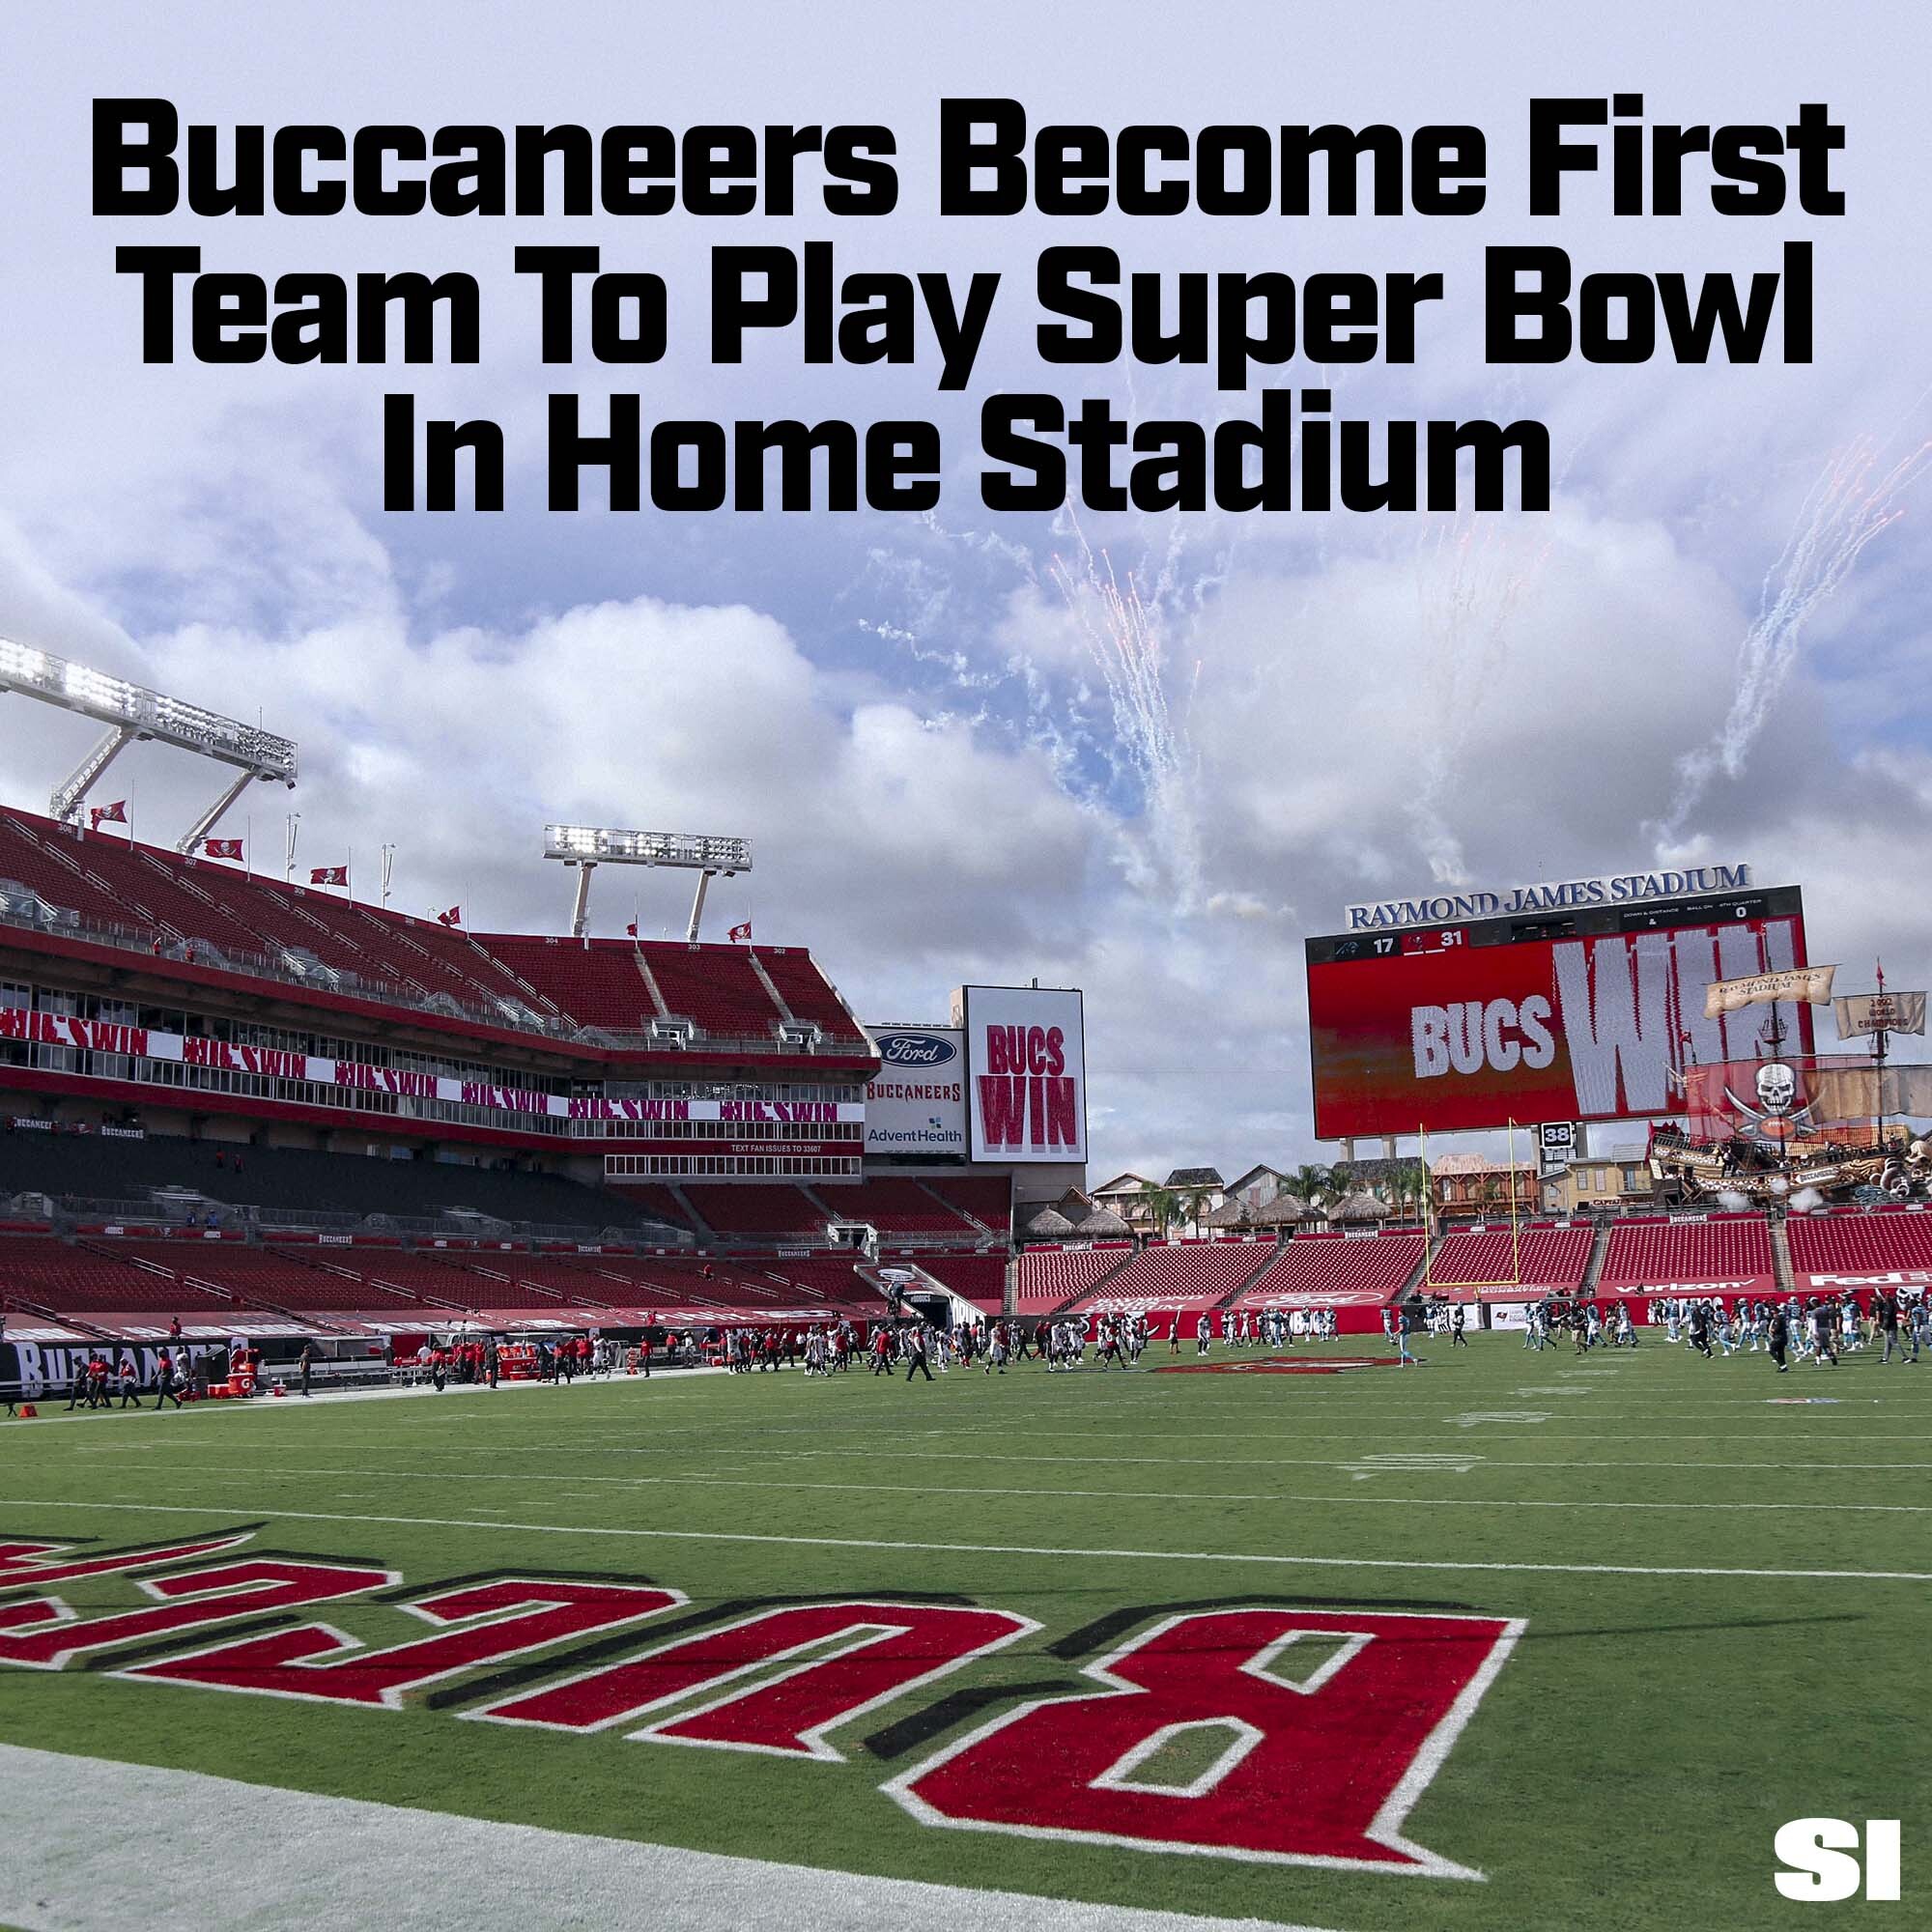 Bucs can become 1st to play Super Bowl at home